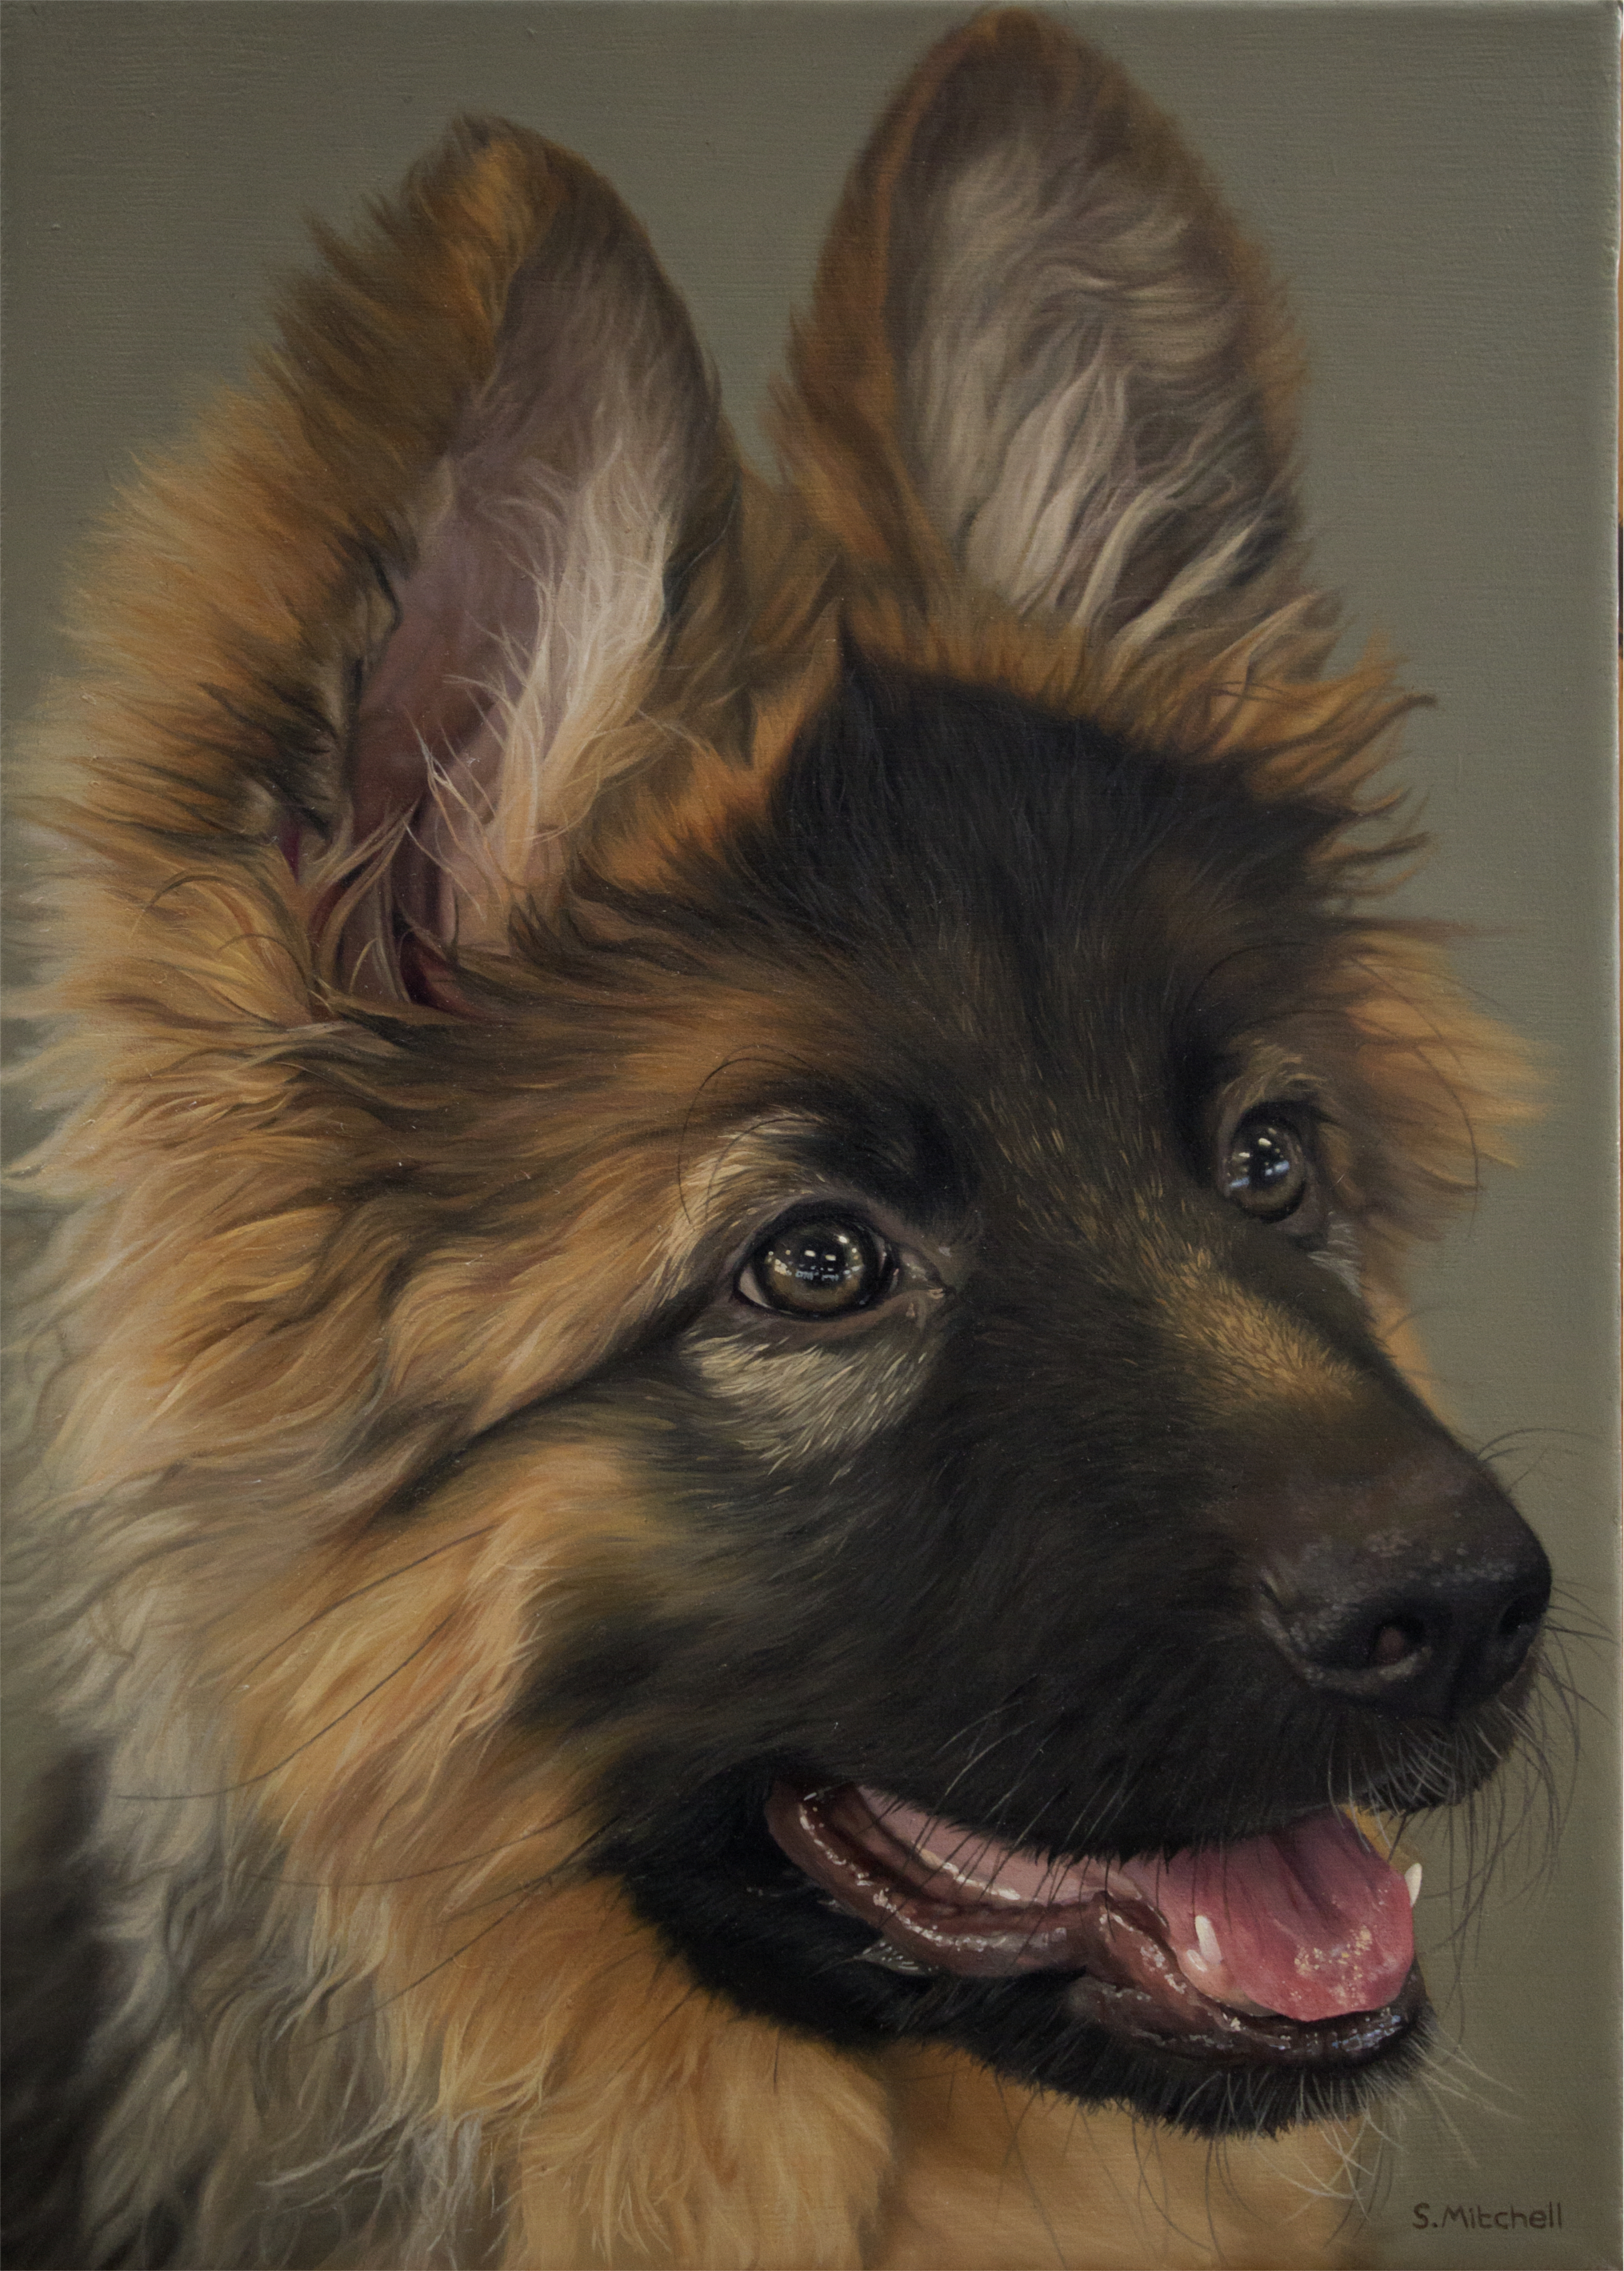 My oil painting of a fellow Redditor's pet dog, I hope you like it ...